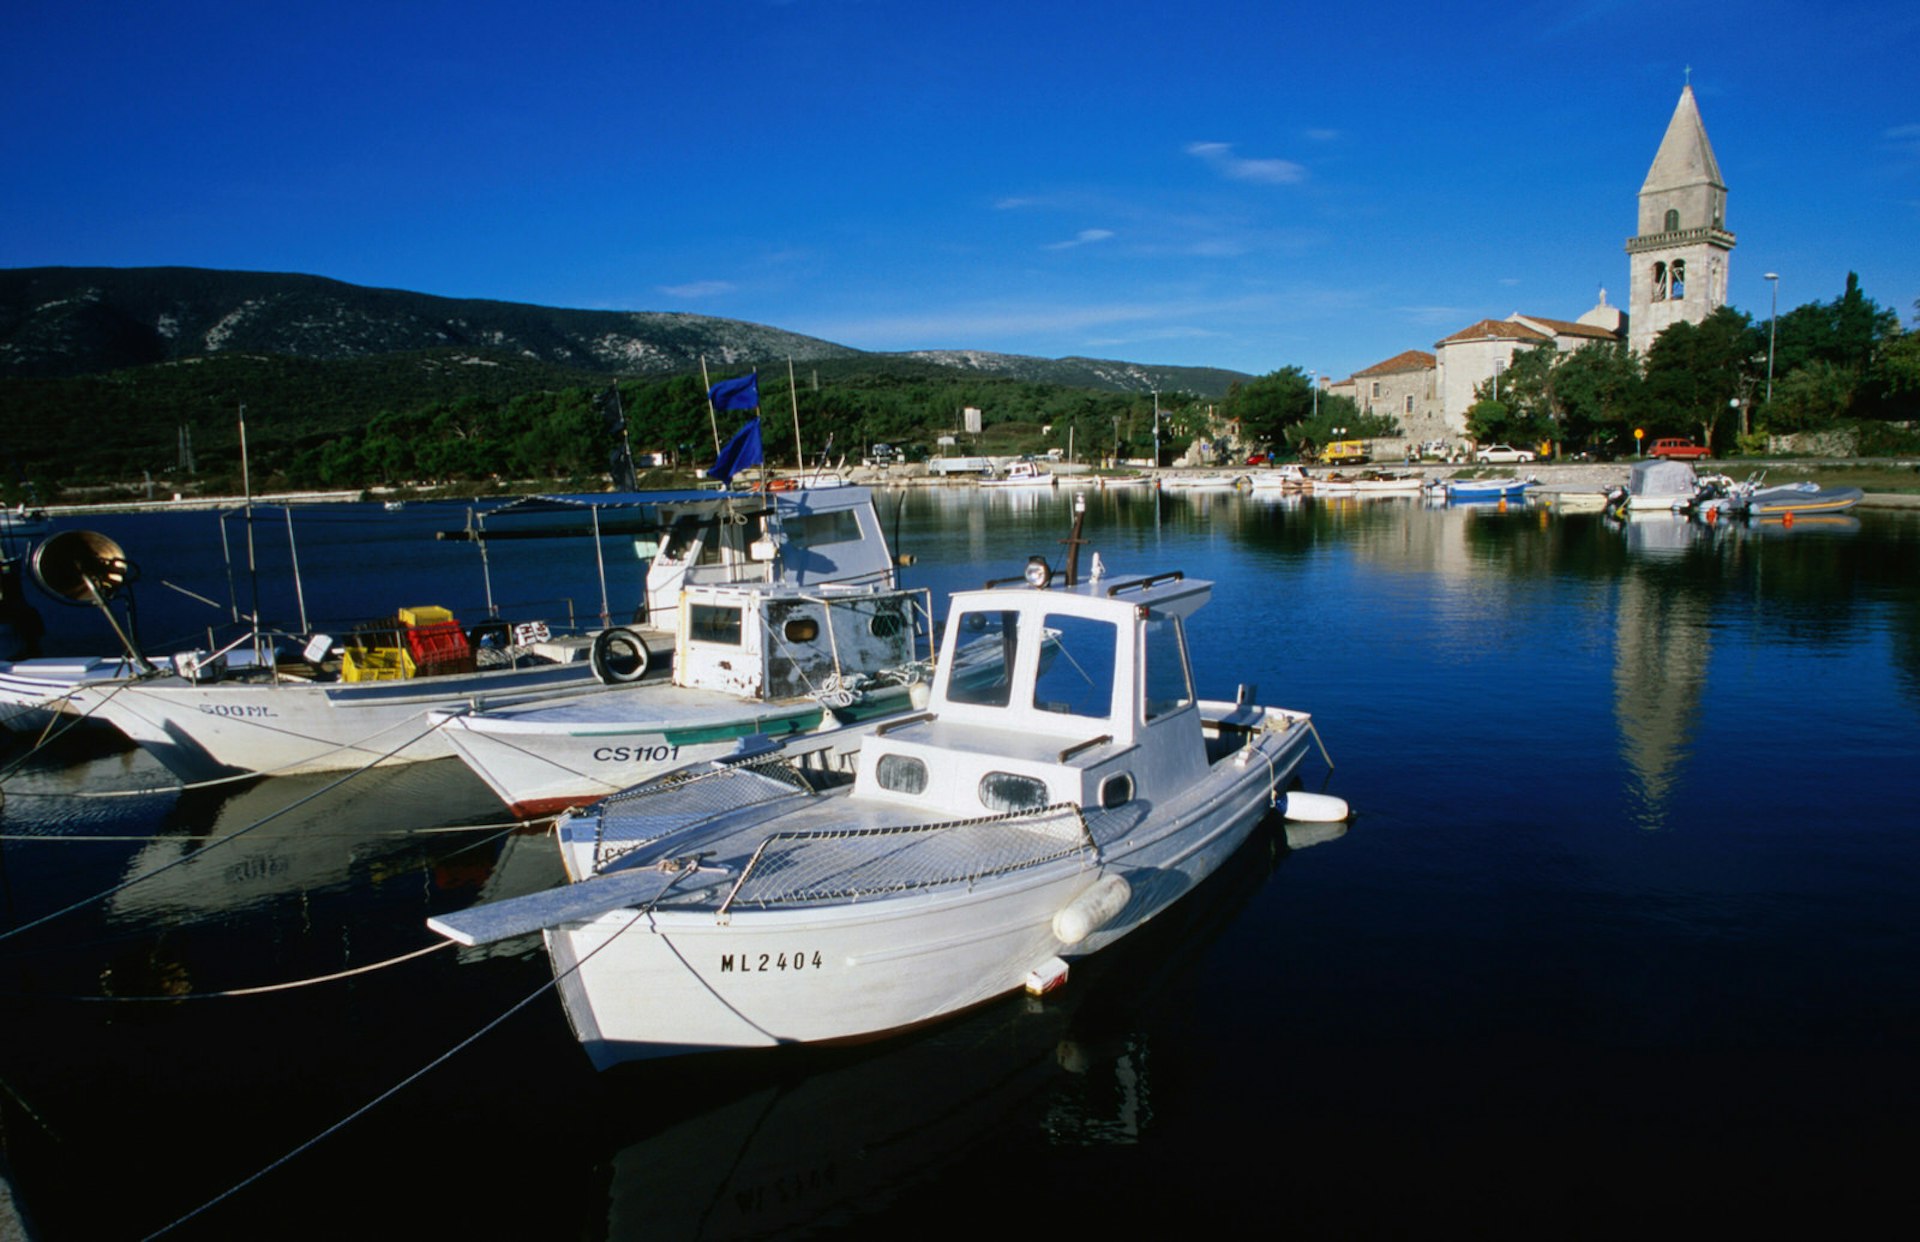 Osor, on Cres Island, is the perfect place for peace and quiet